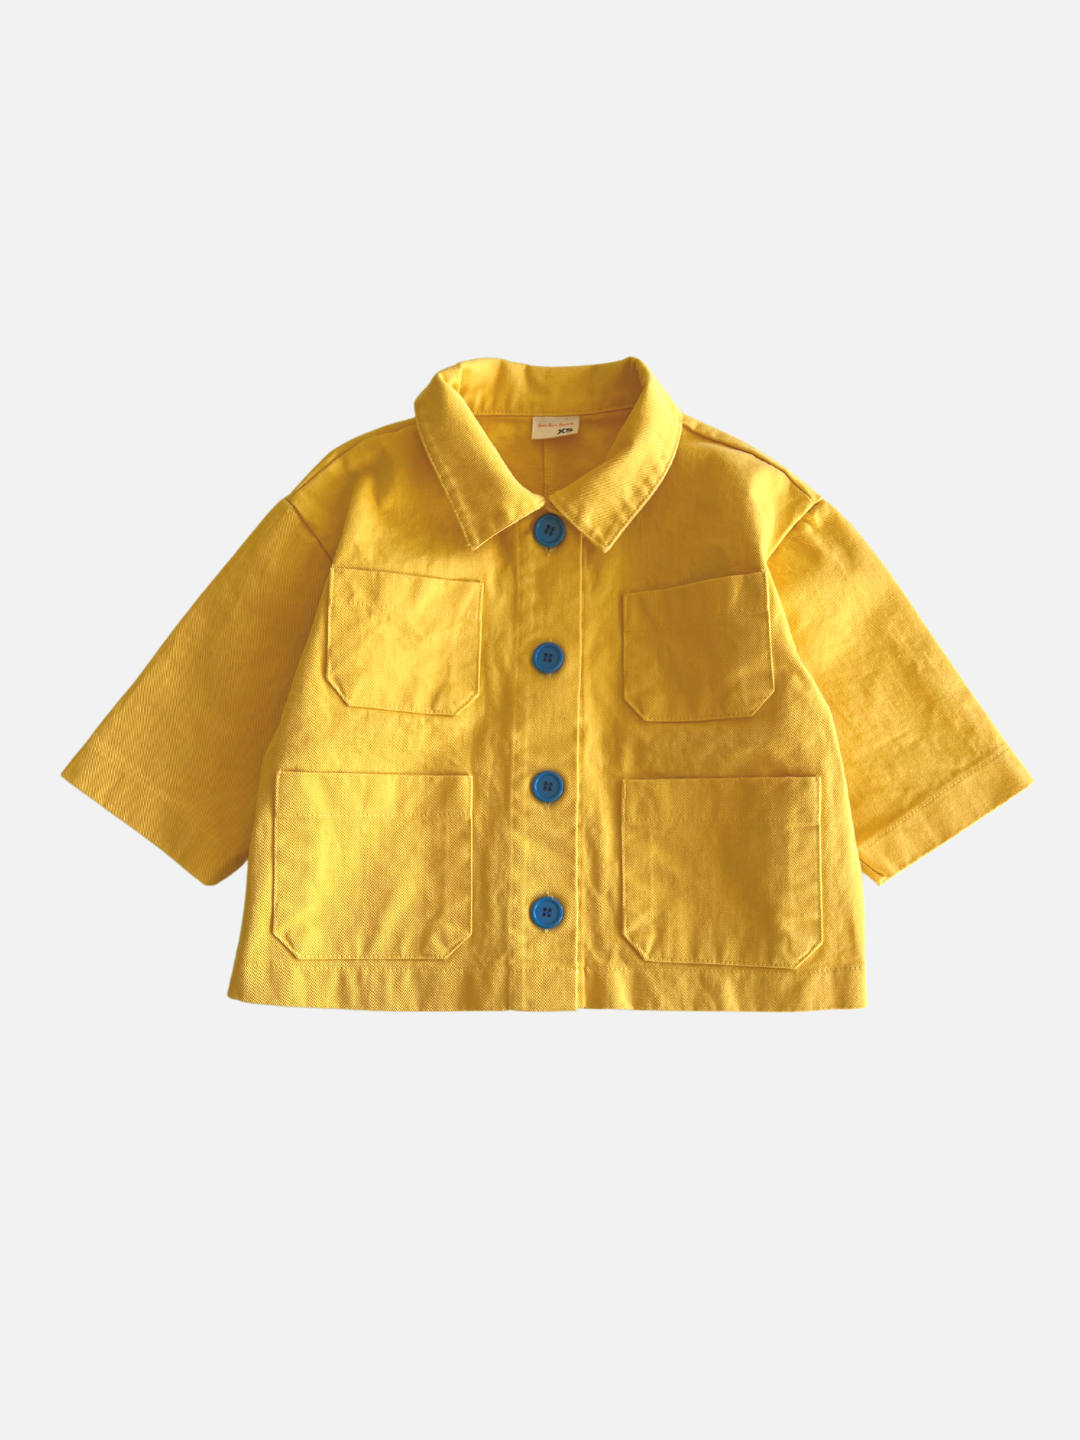 A kids' jacket in yellow, with four pockets and four blue buttons